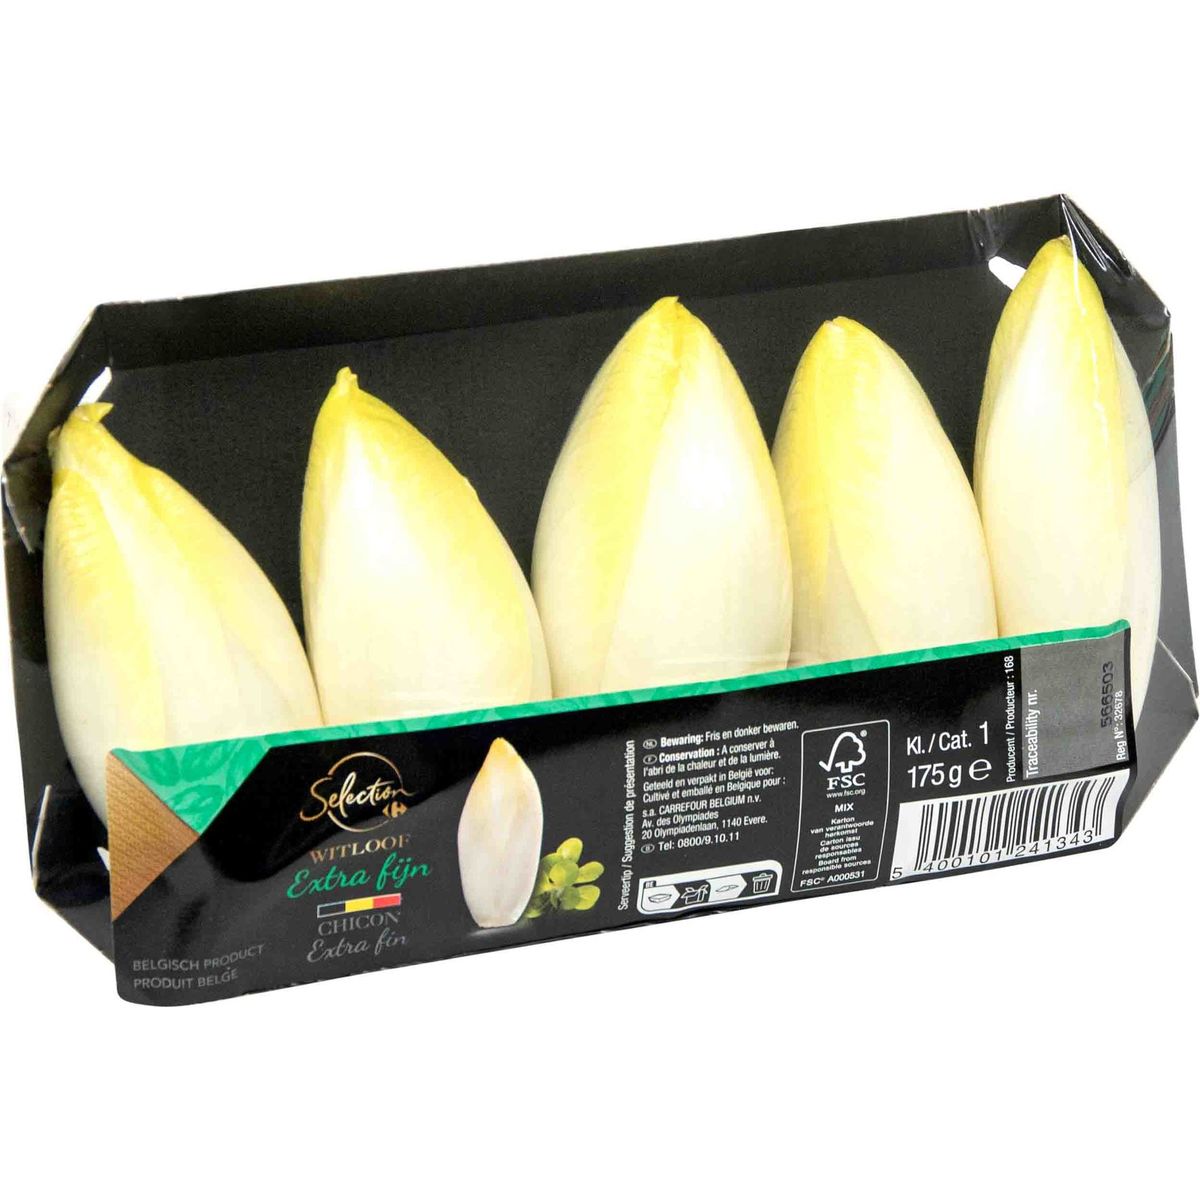 Carrefour Chicons Extra Fin 175 g